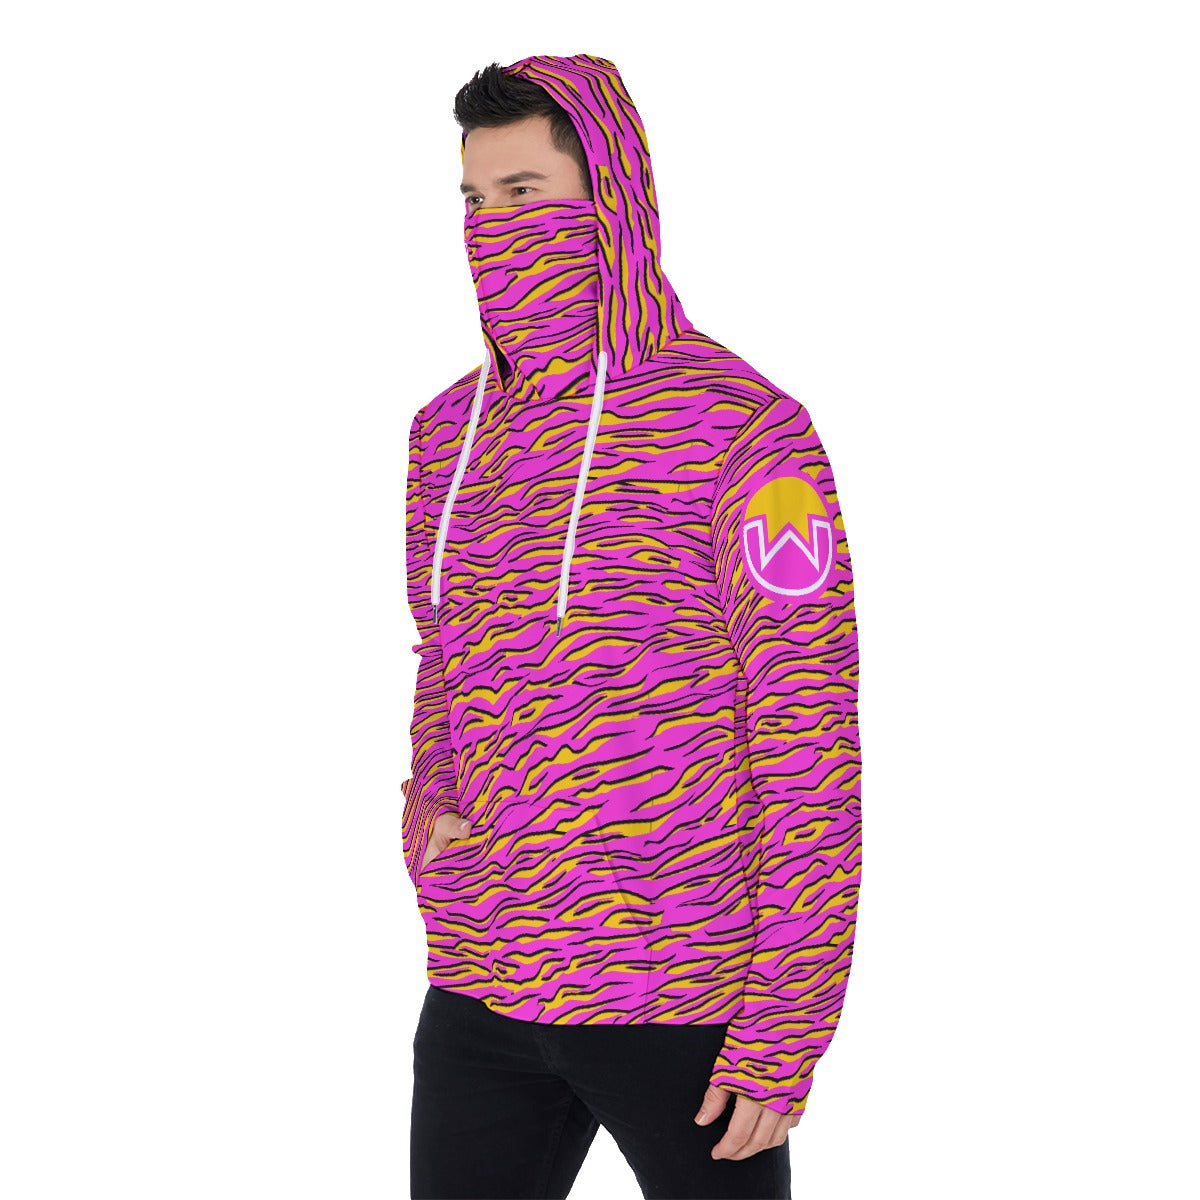 Wownero Tiger Stripe Fleece Hoodie With Mask